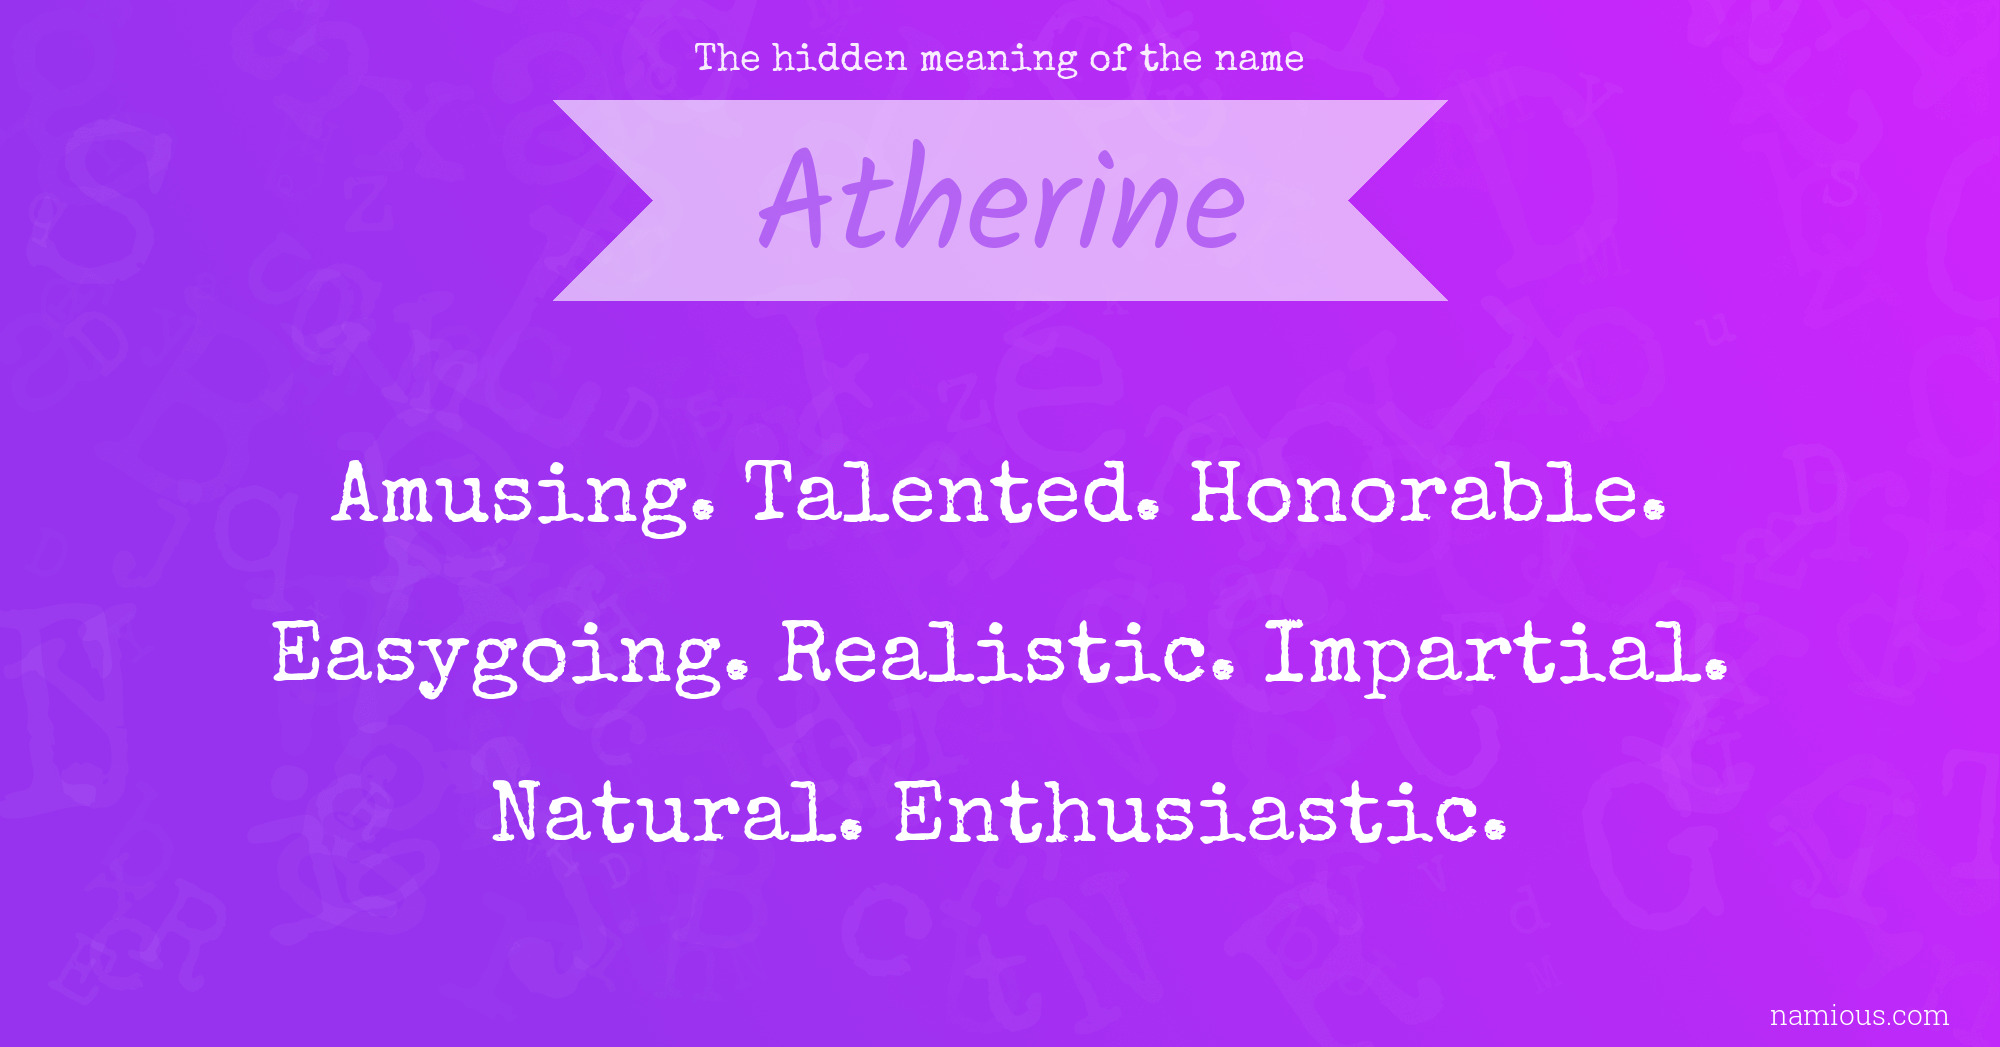 The hidden meaning of the name Atherine